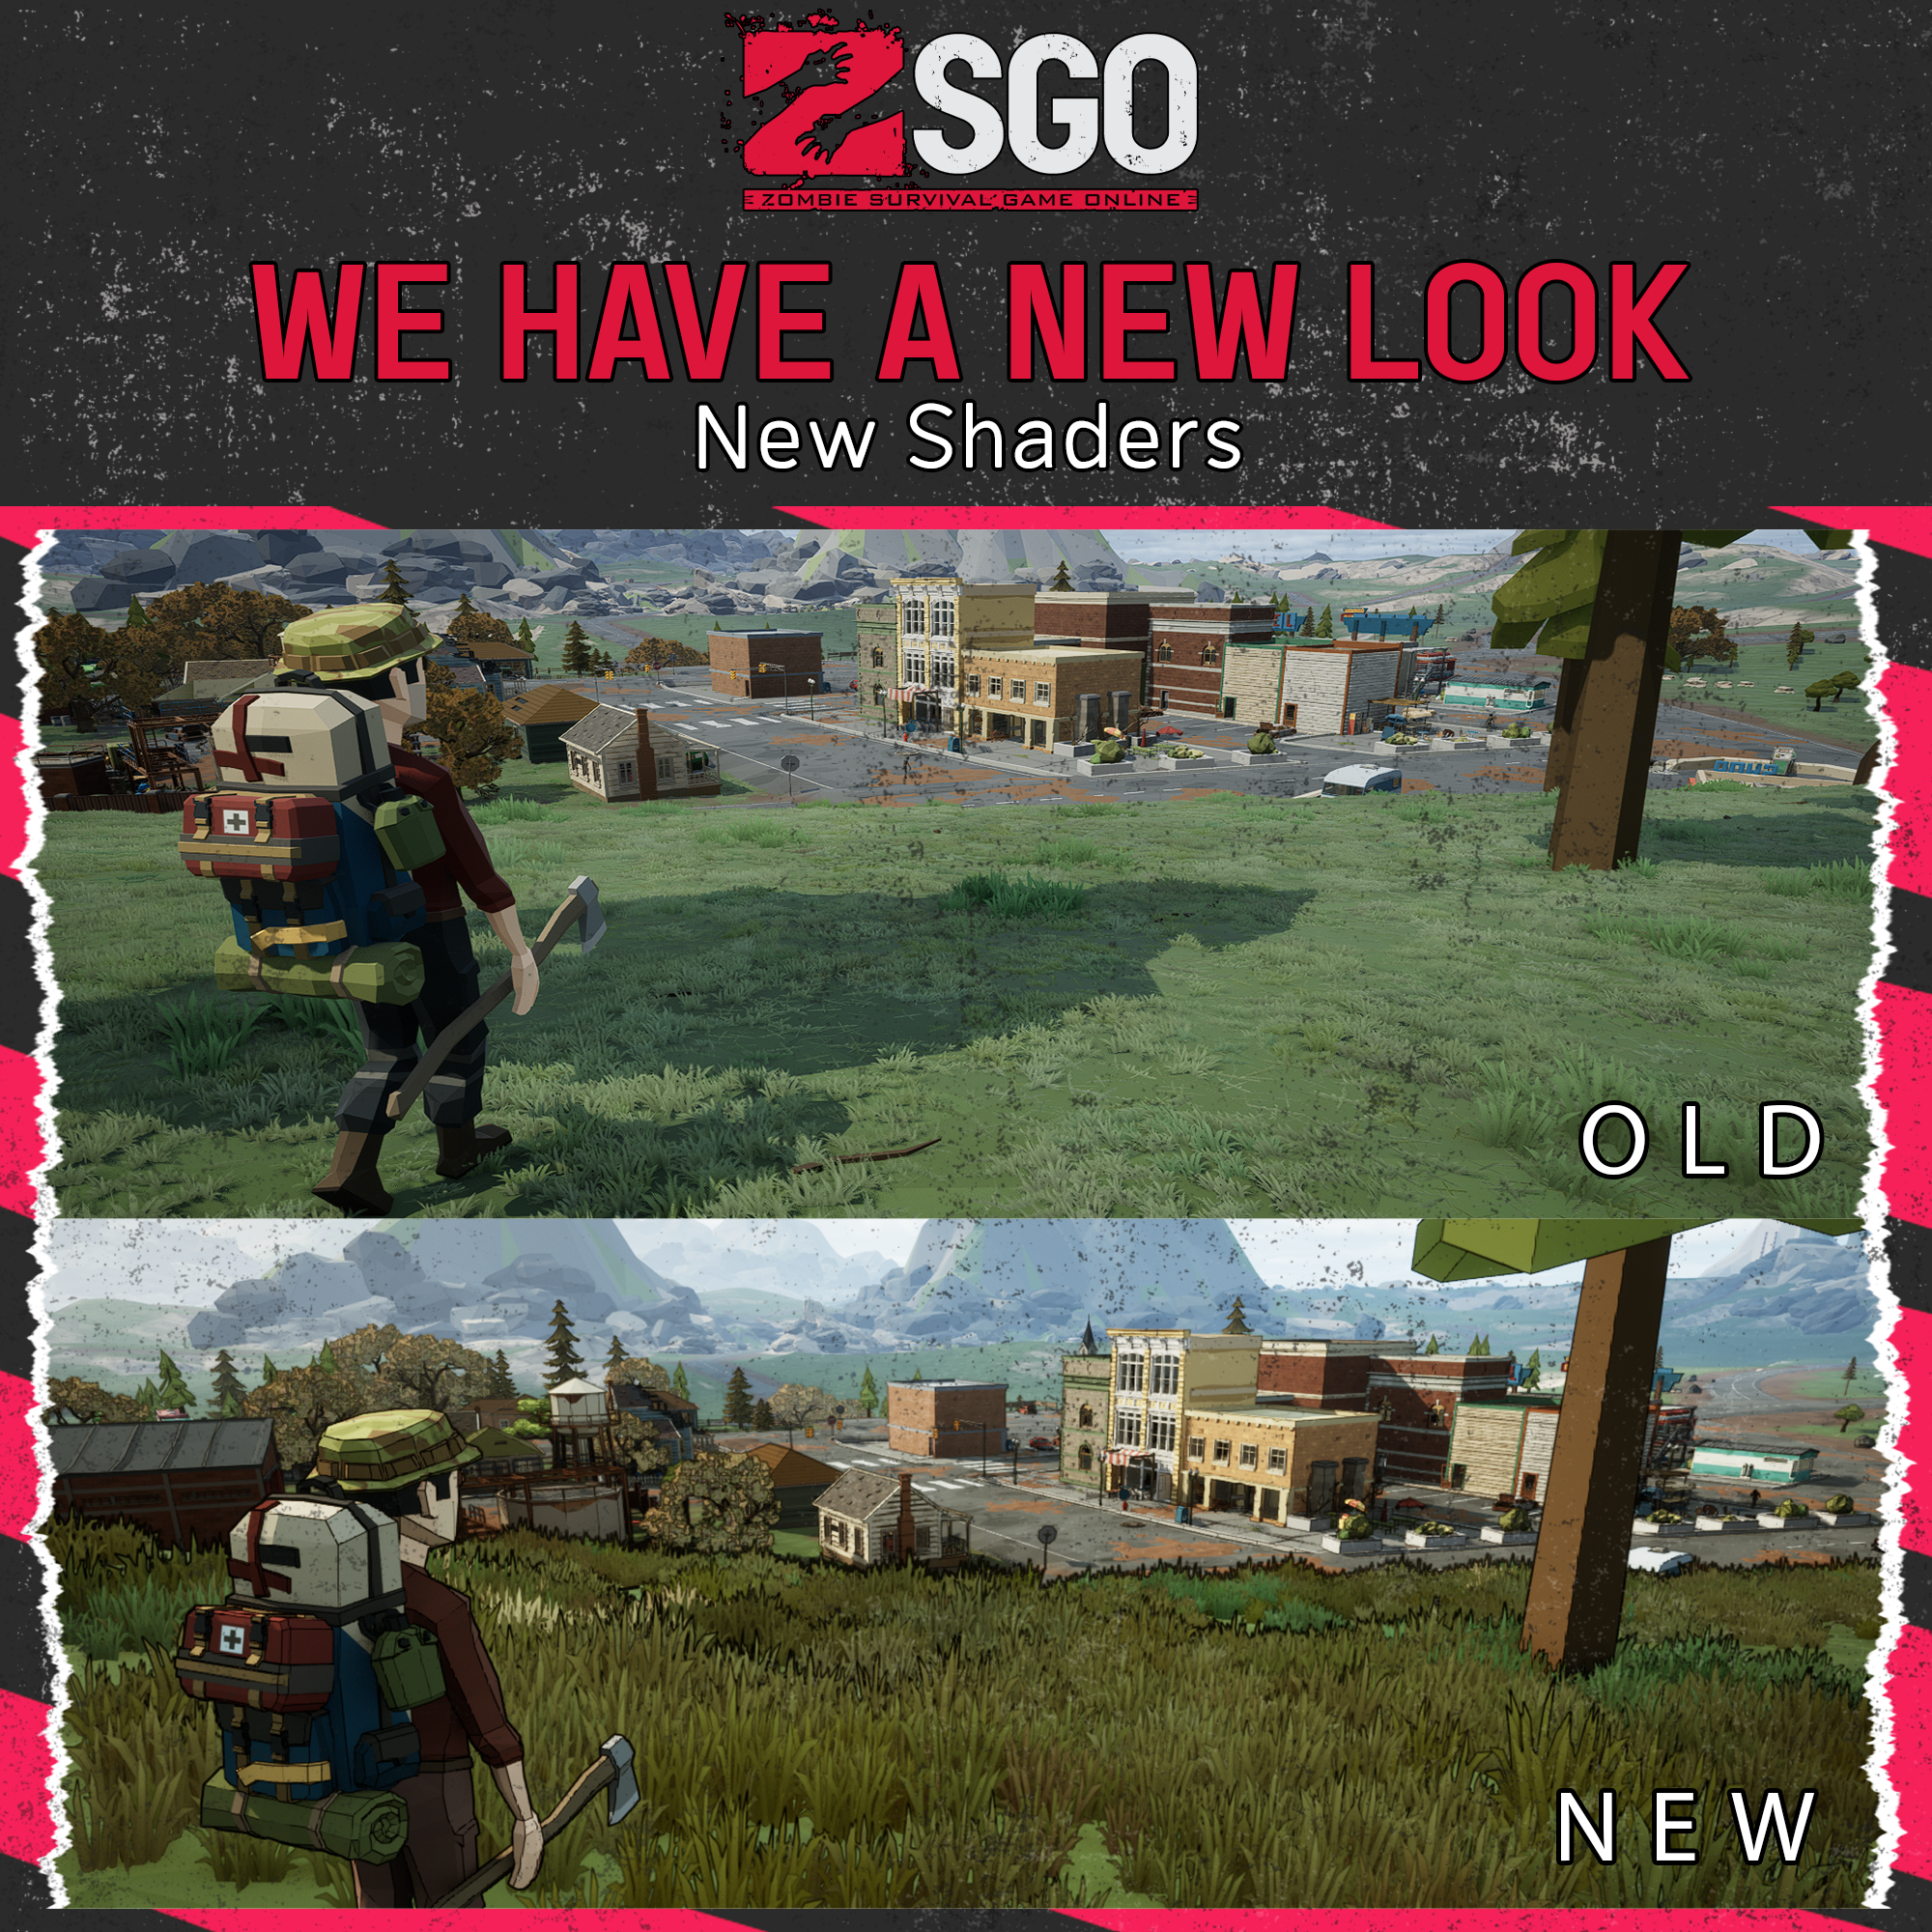 New look at zombie game graphics & shaders update.